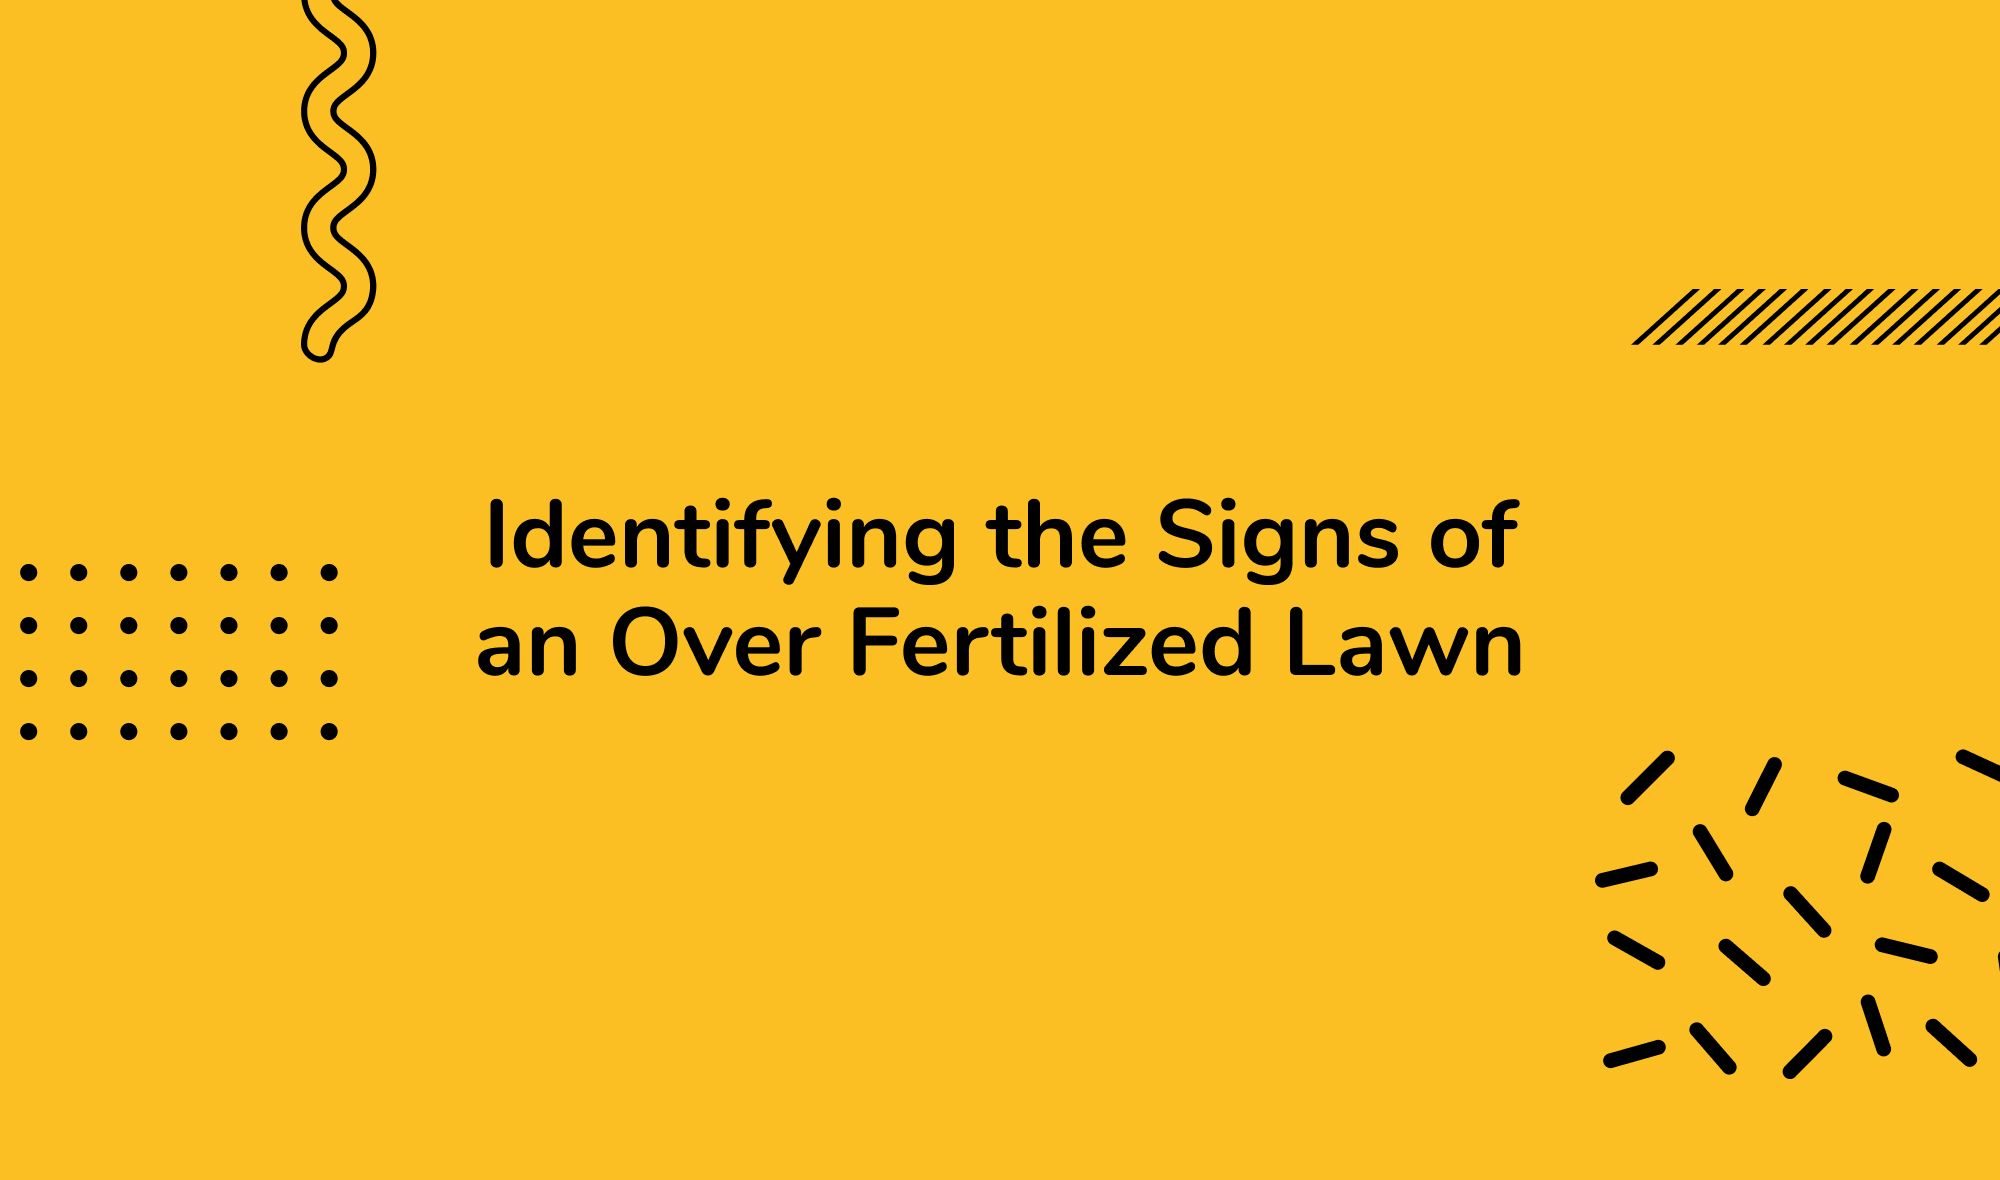 Identifying the Signs of an Over Fertilized Lawn